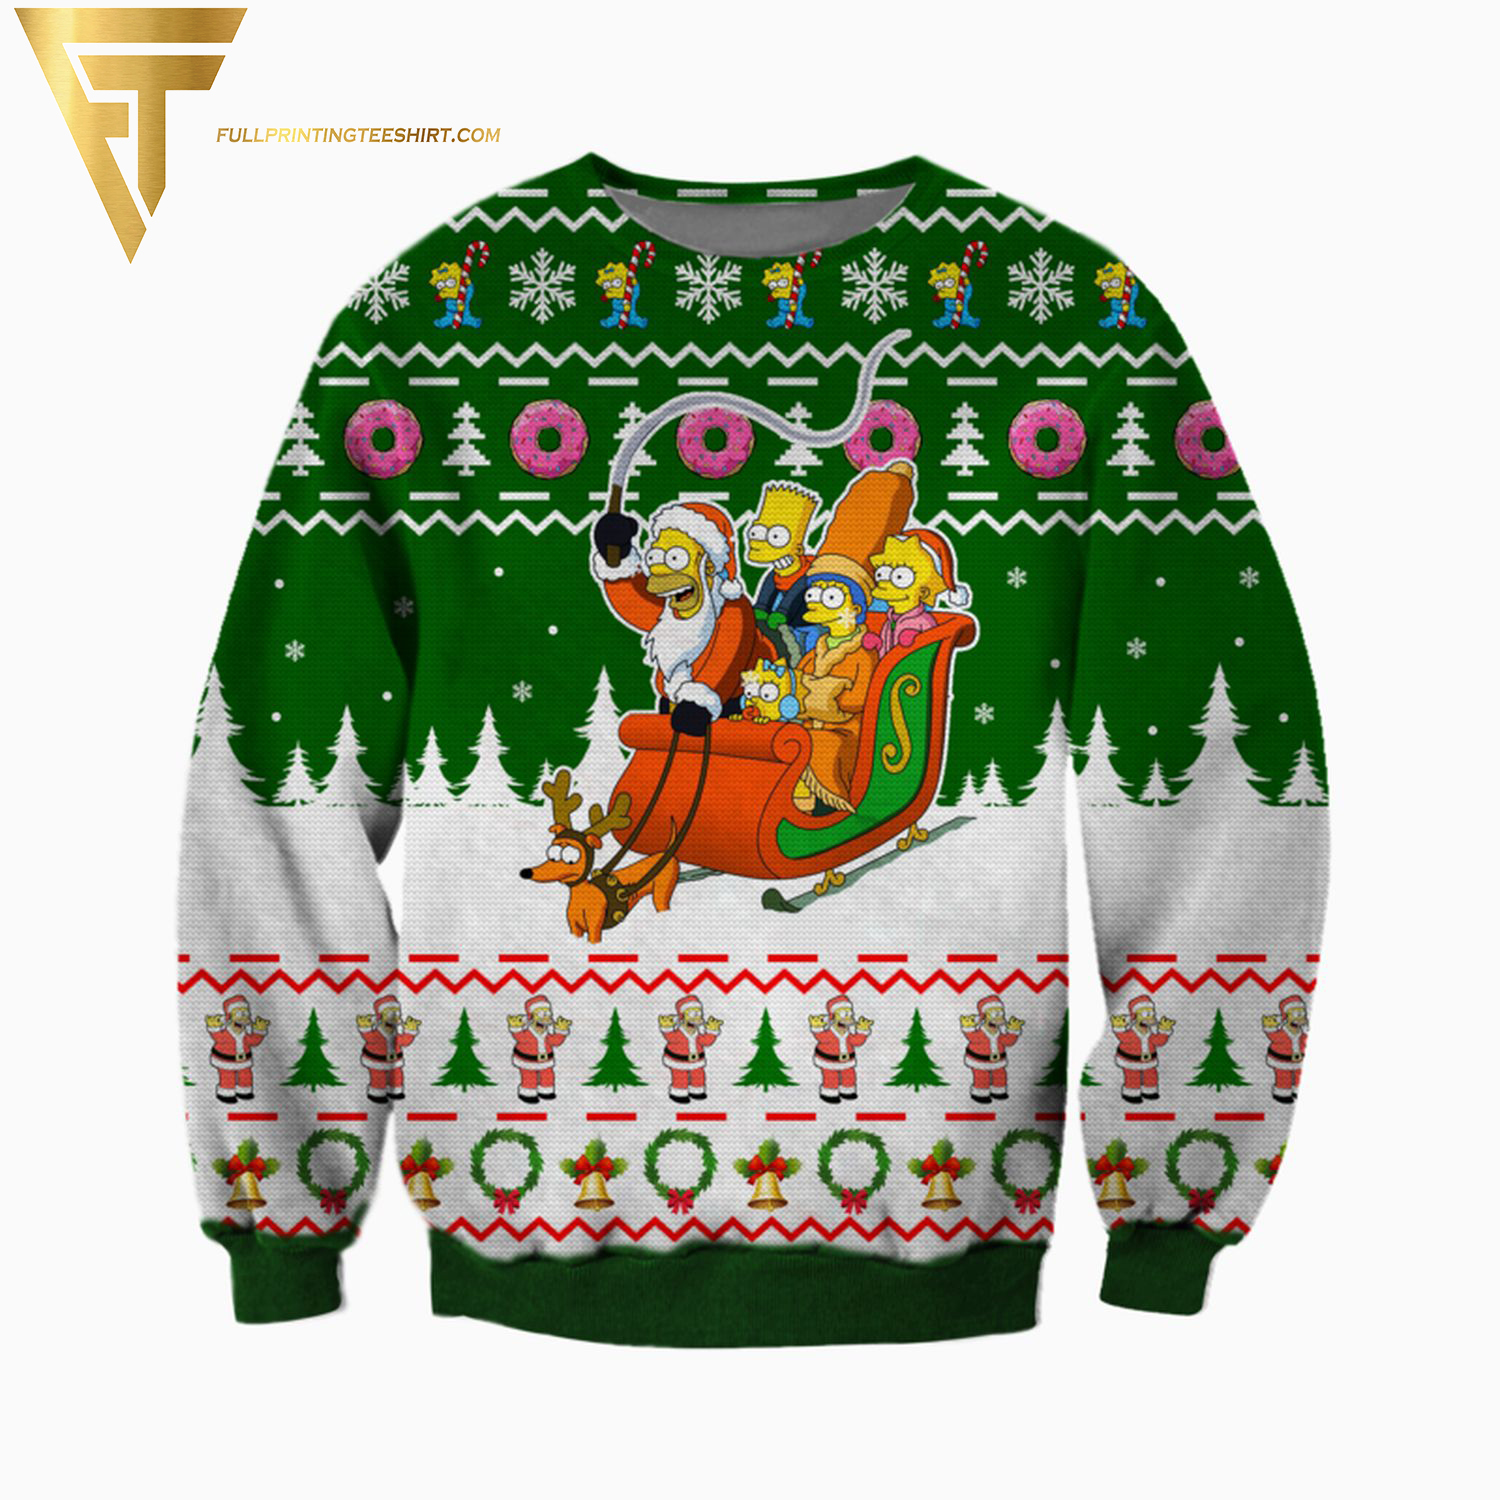 The Simpsons Full Print Ugly Christmas Sweater